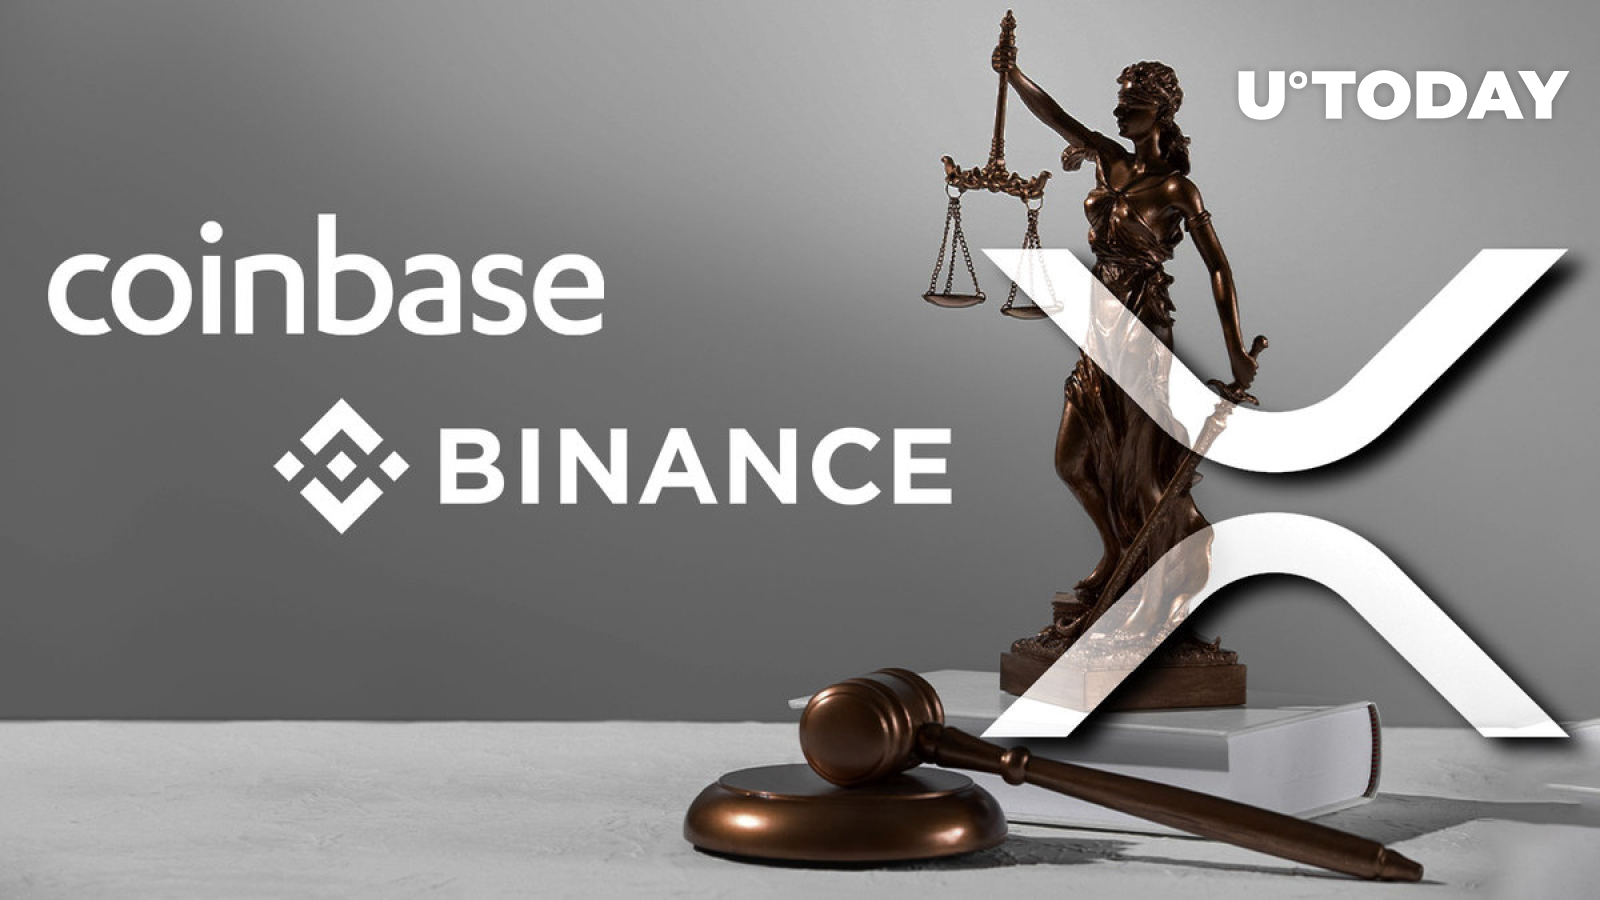 xrp-holders-lawyer-wants-to-represent-coinbase-and-binance-customers-details